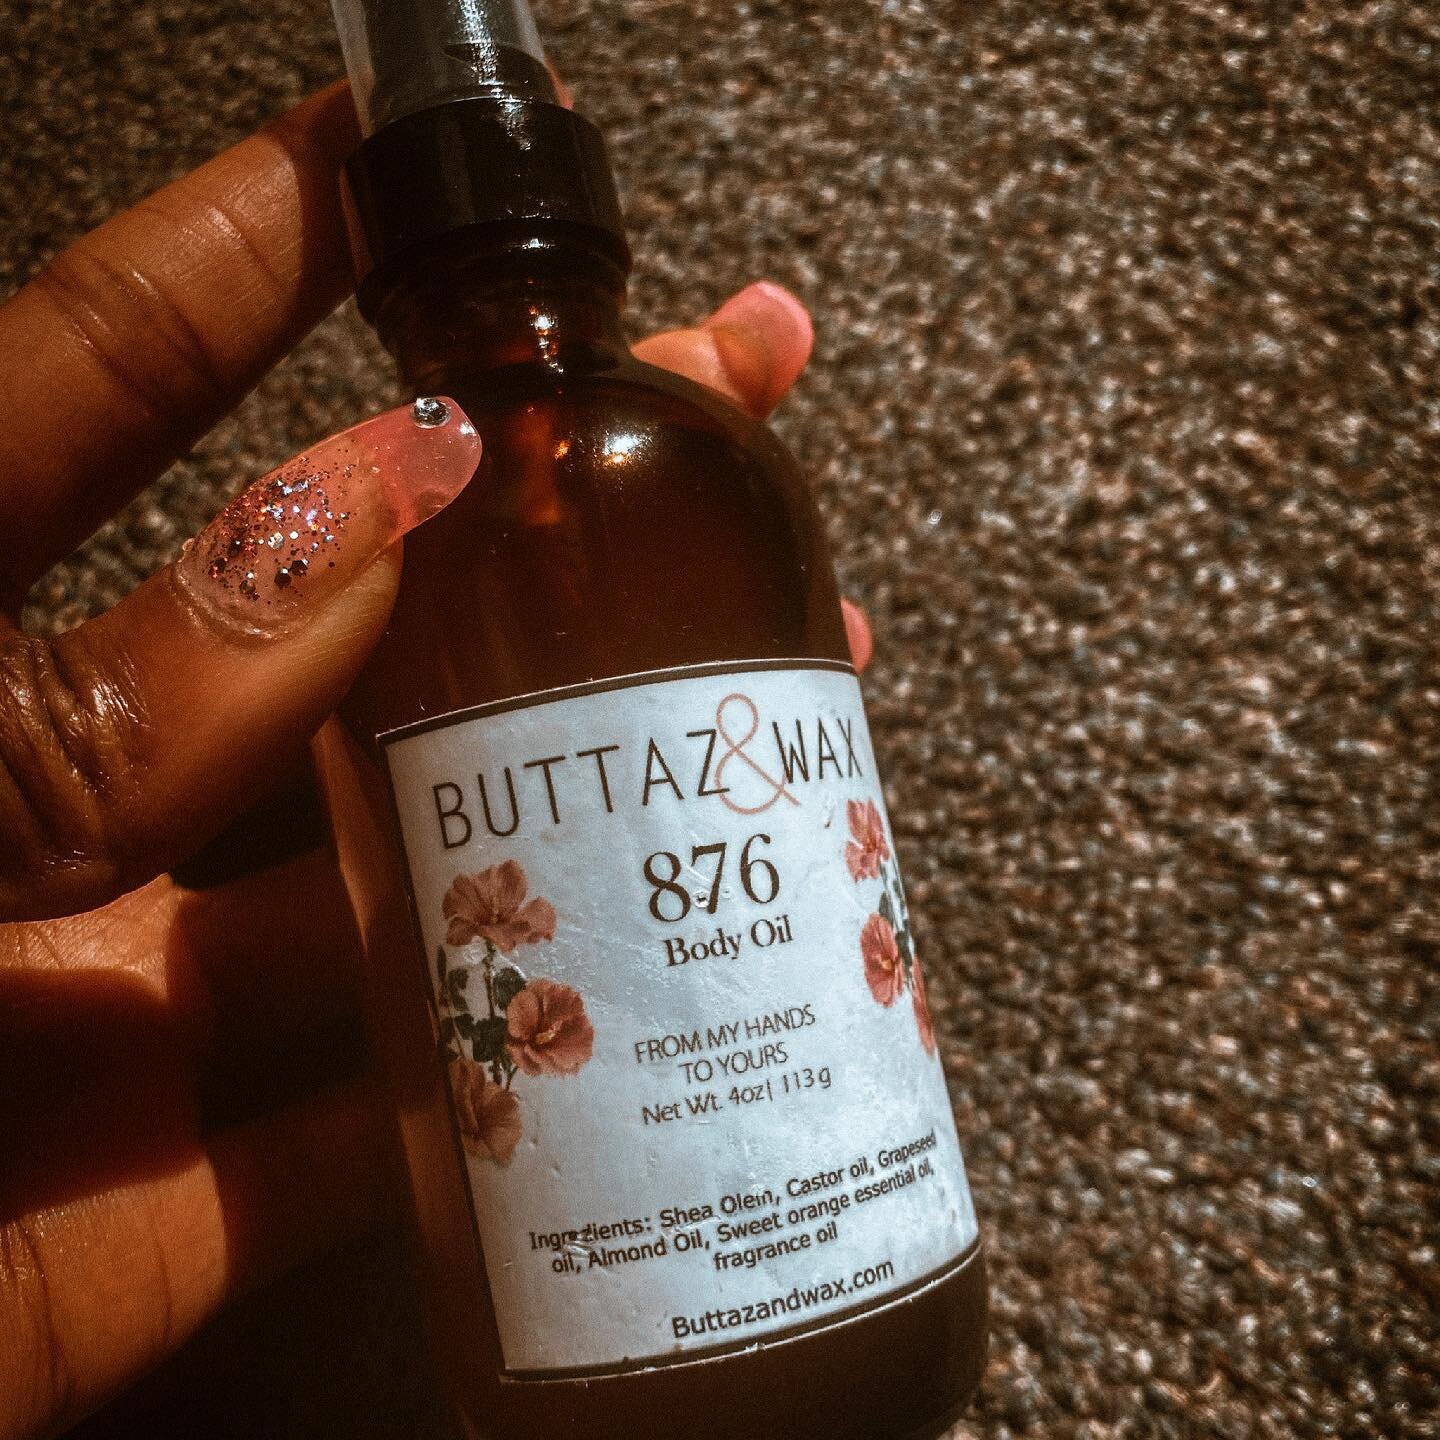 It&rsquo;s almost summer which means more adventures in the sun. Pop our Body Oil in your bag and take it with you where ever you go to keep your skin heathy and glowing.

.
.
.
.

#ahomeforselfcare #frommyhandstoyours #buttazandwax #ashbegone #antia